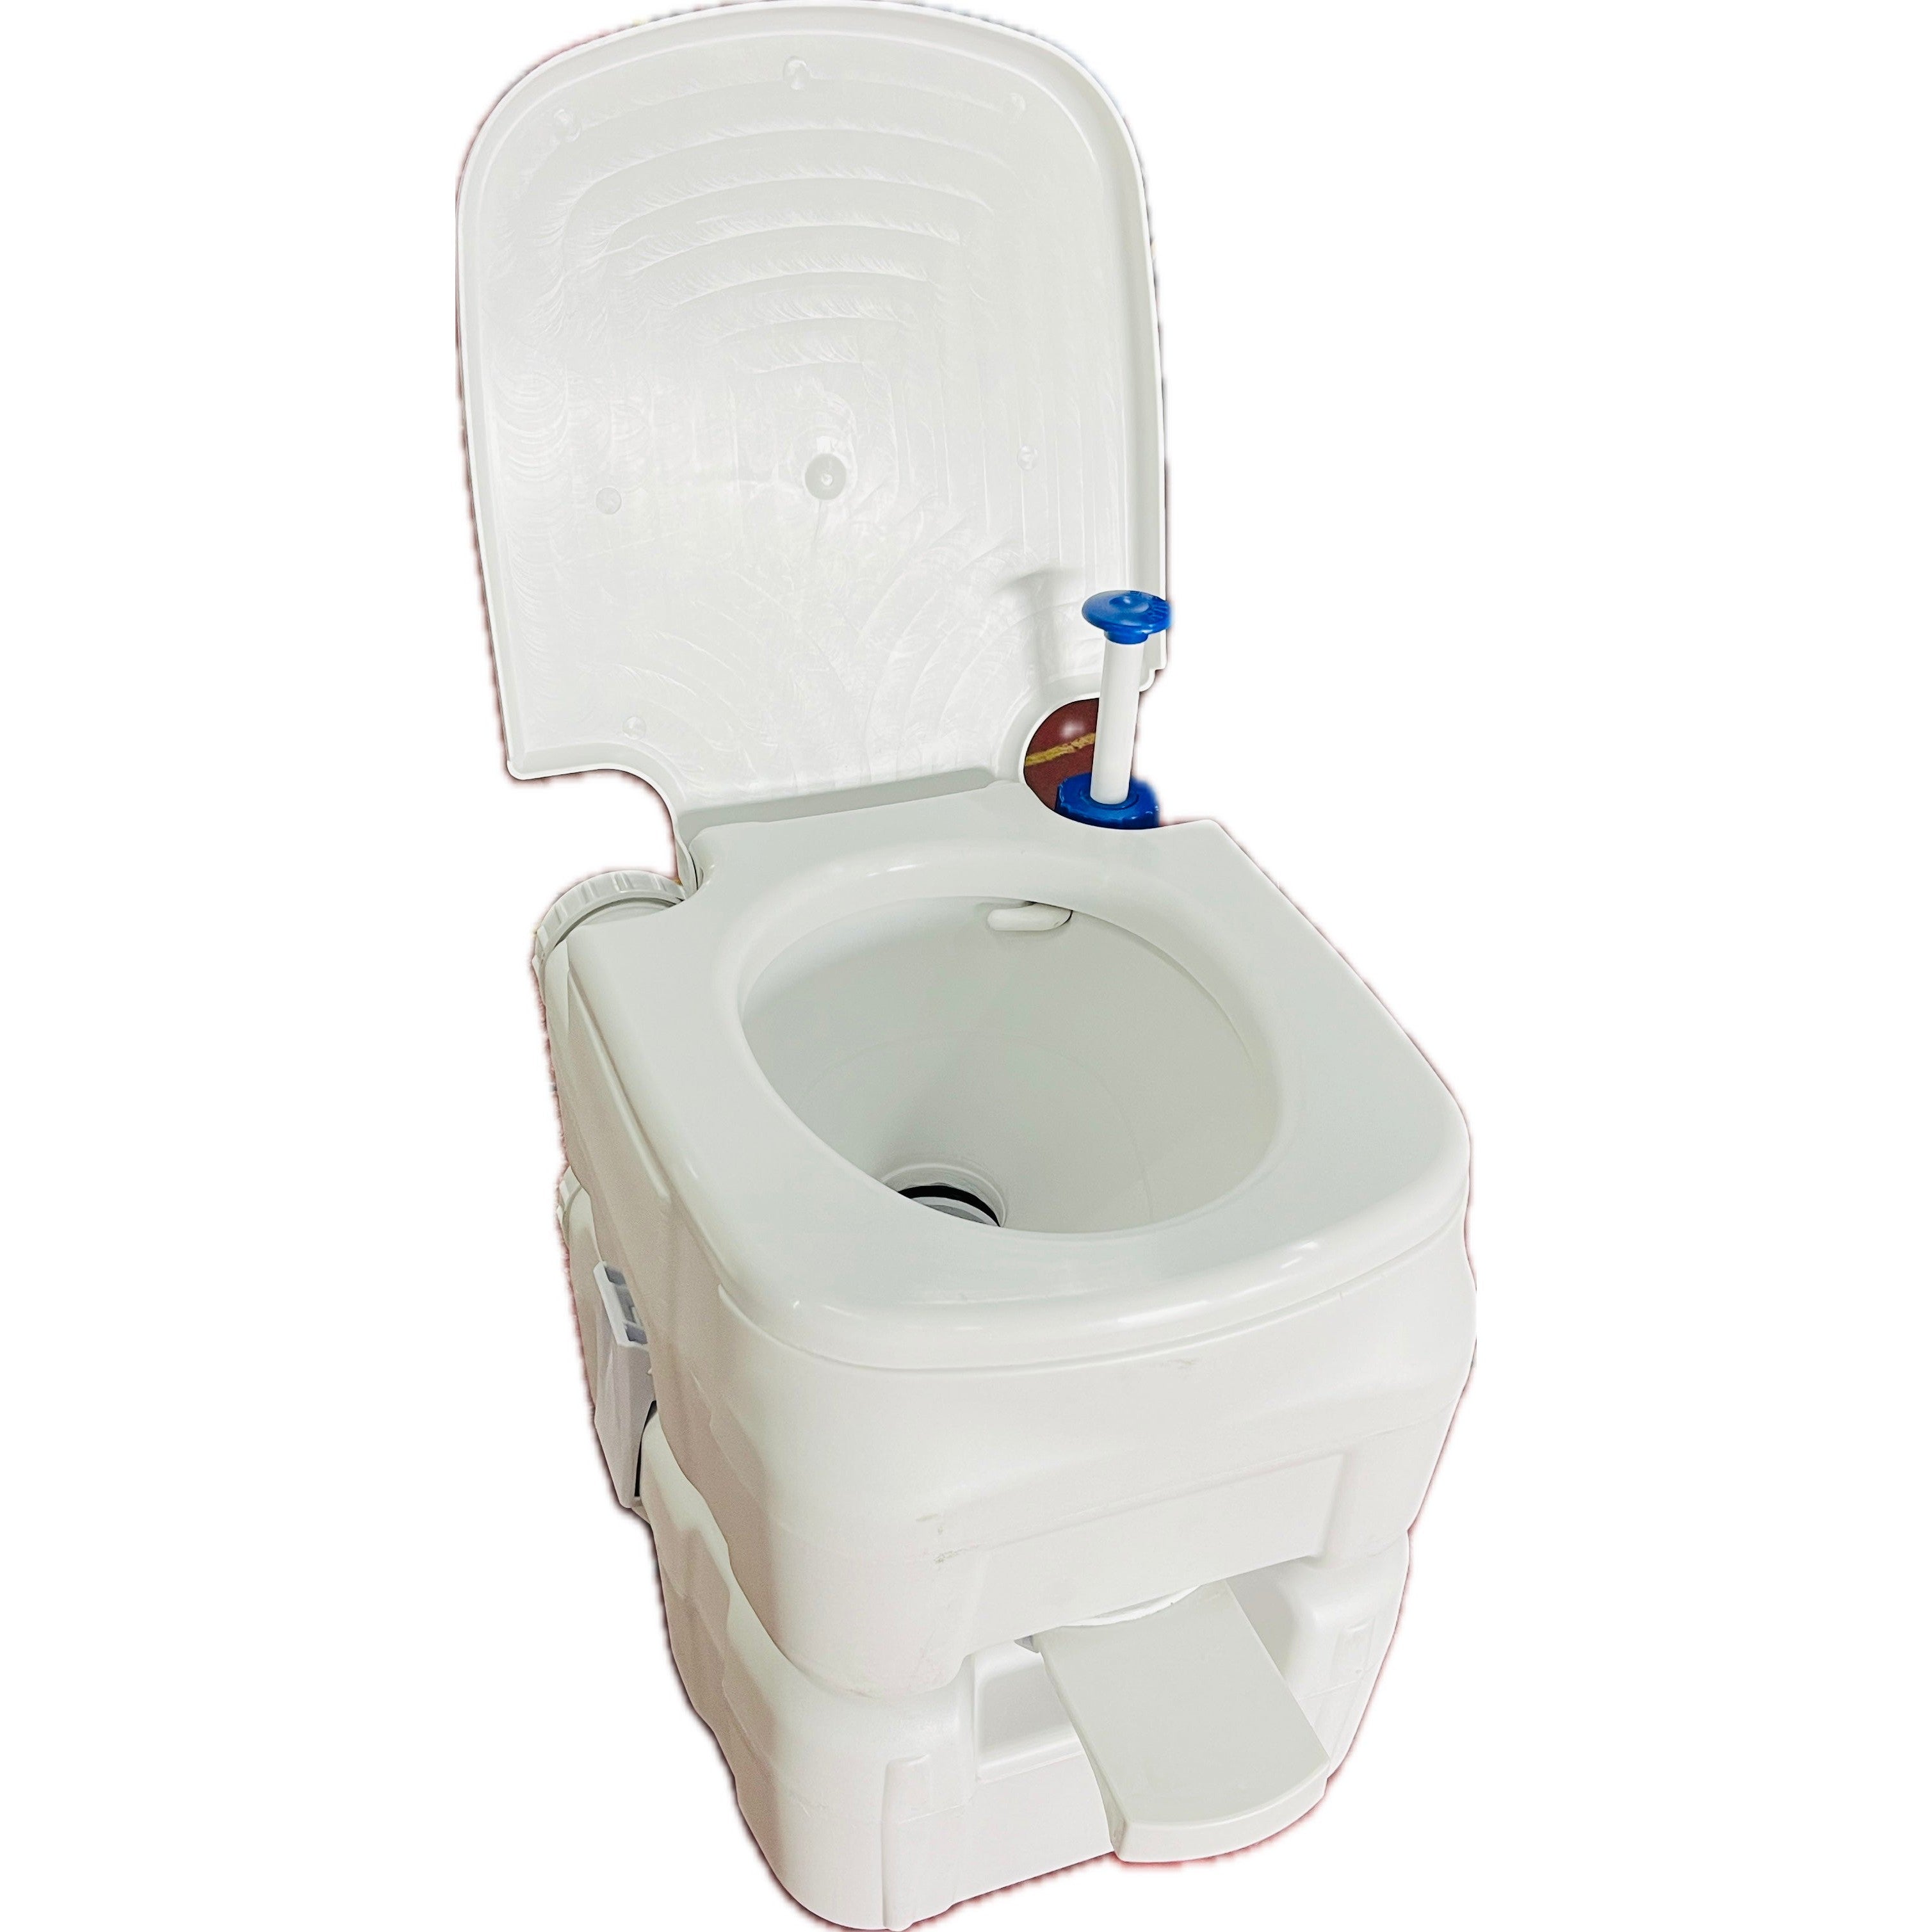 Portable Chemical Toilet QuteeLoo GD